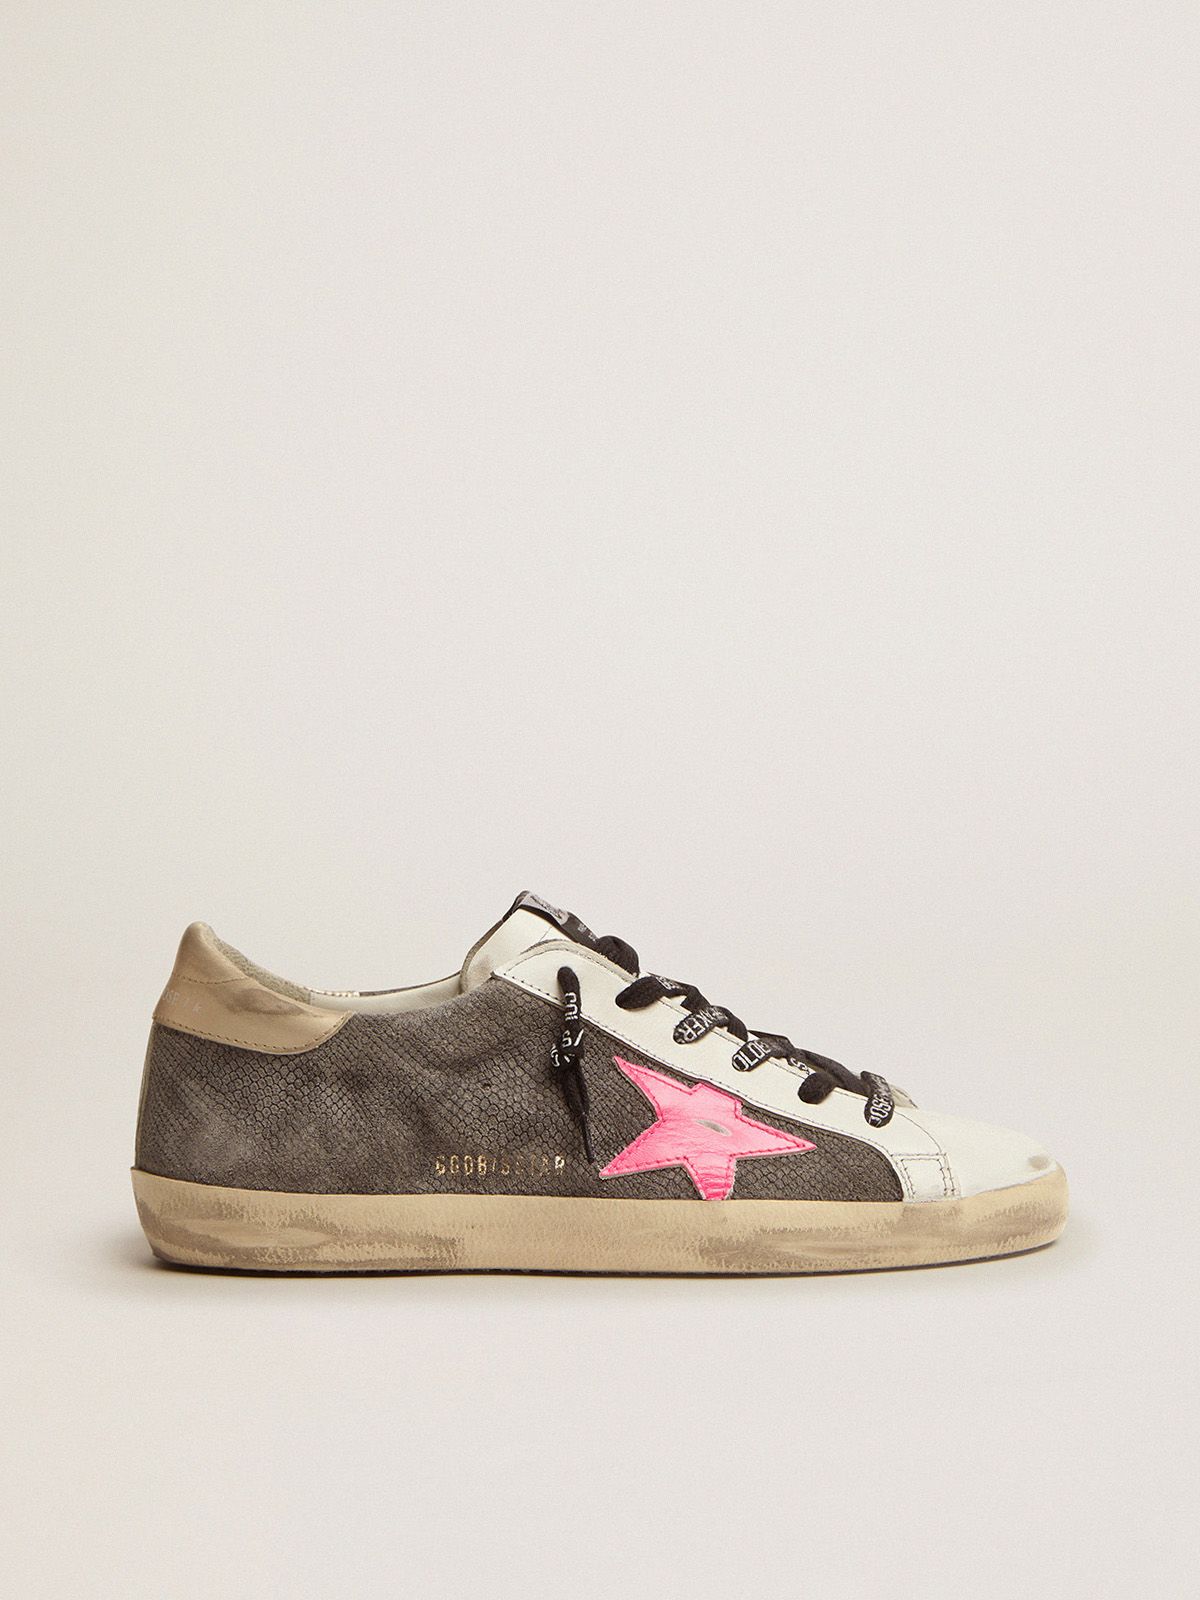 golden goose upper laminated sneakers Super-Star and gold leather snake-print suede LTD tab with heel